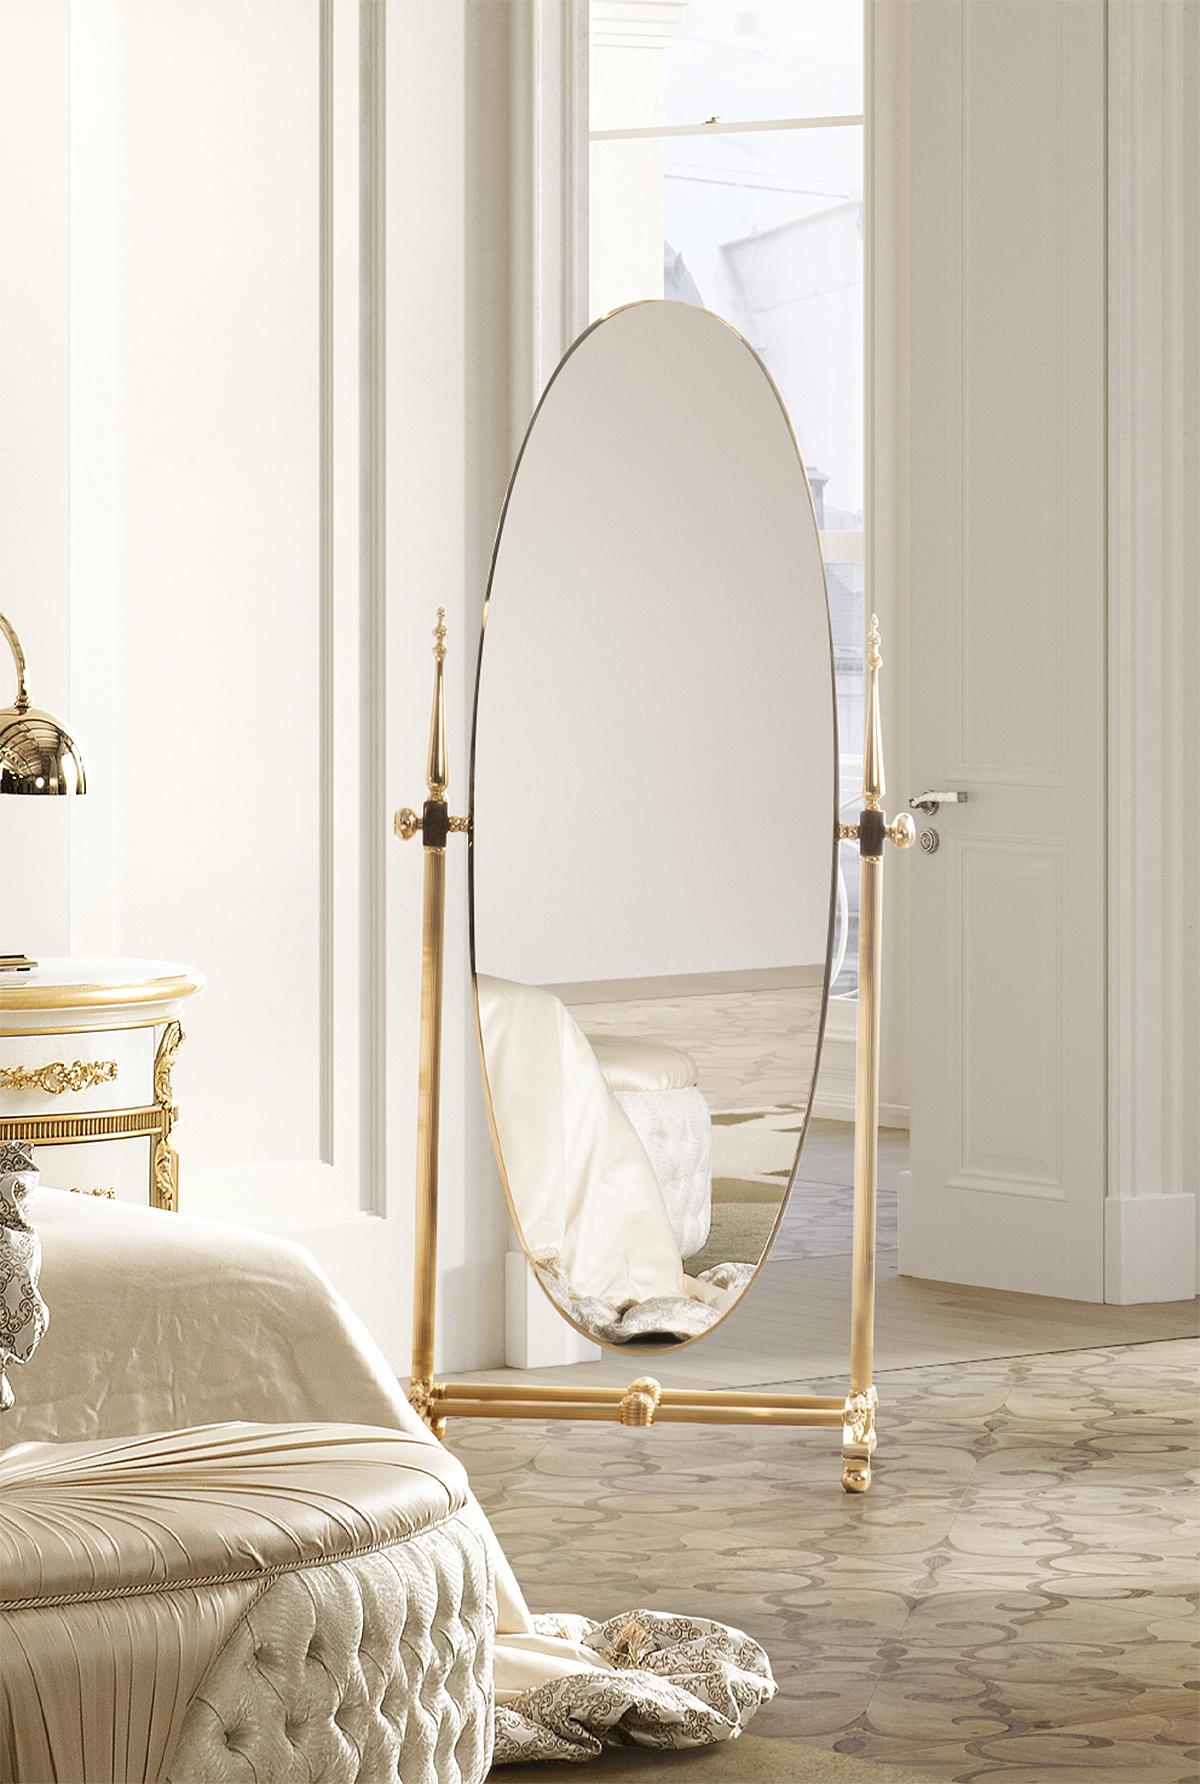 The EL065 tilting mirror is an elegant creation of high craftsmanship, a piece of furniture that will add charm and style to any room.

The main material of this mirror is brass, known for its luster and ability to withstand the passage of time.